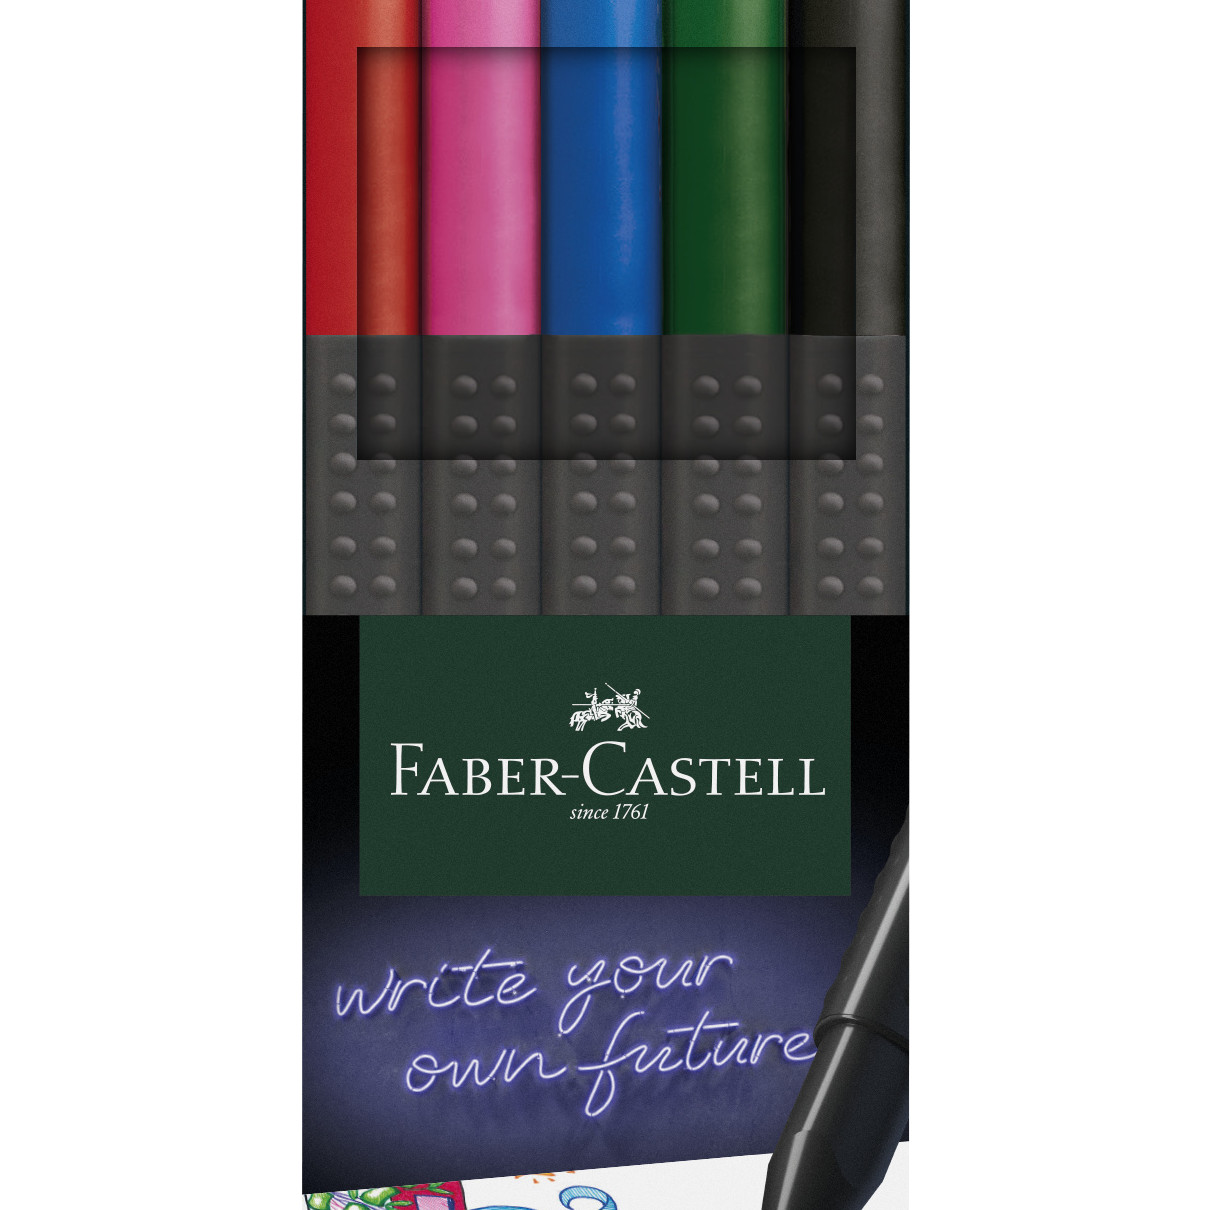 Faber-Castell Grip Finepen - Basic (Pack of 5)